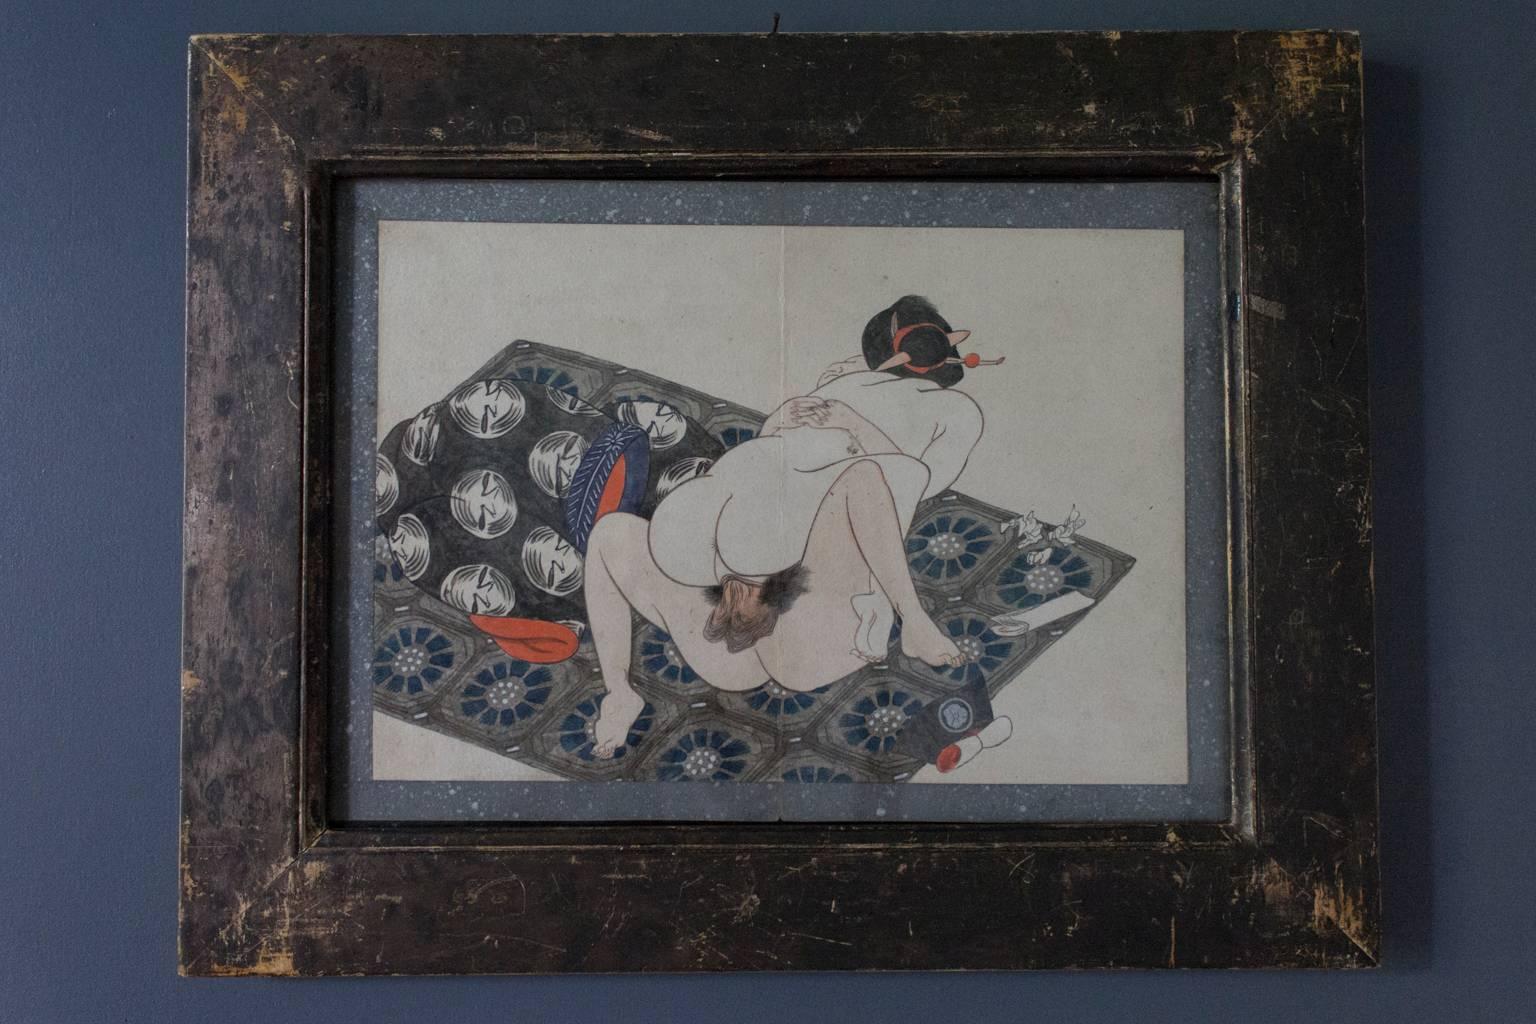 Shunga was heavily influenced by illustrations in Chinese medicine manuals beginning in the Muromachi era (1336 to 1573). Zhou Fang, a great Tang-dynasty Chinese erotic painter, is also thought to have been influential. He, like many erotic artists